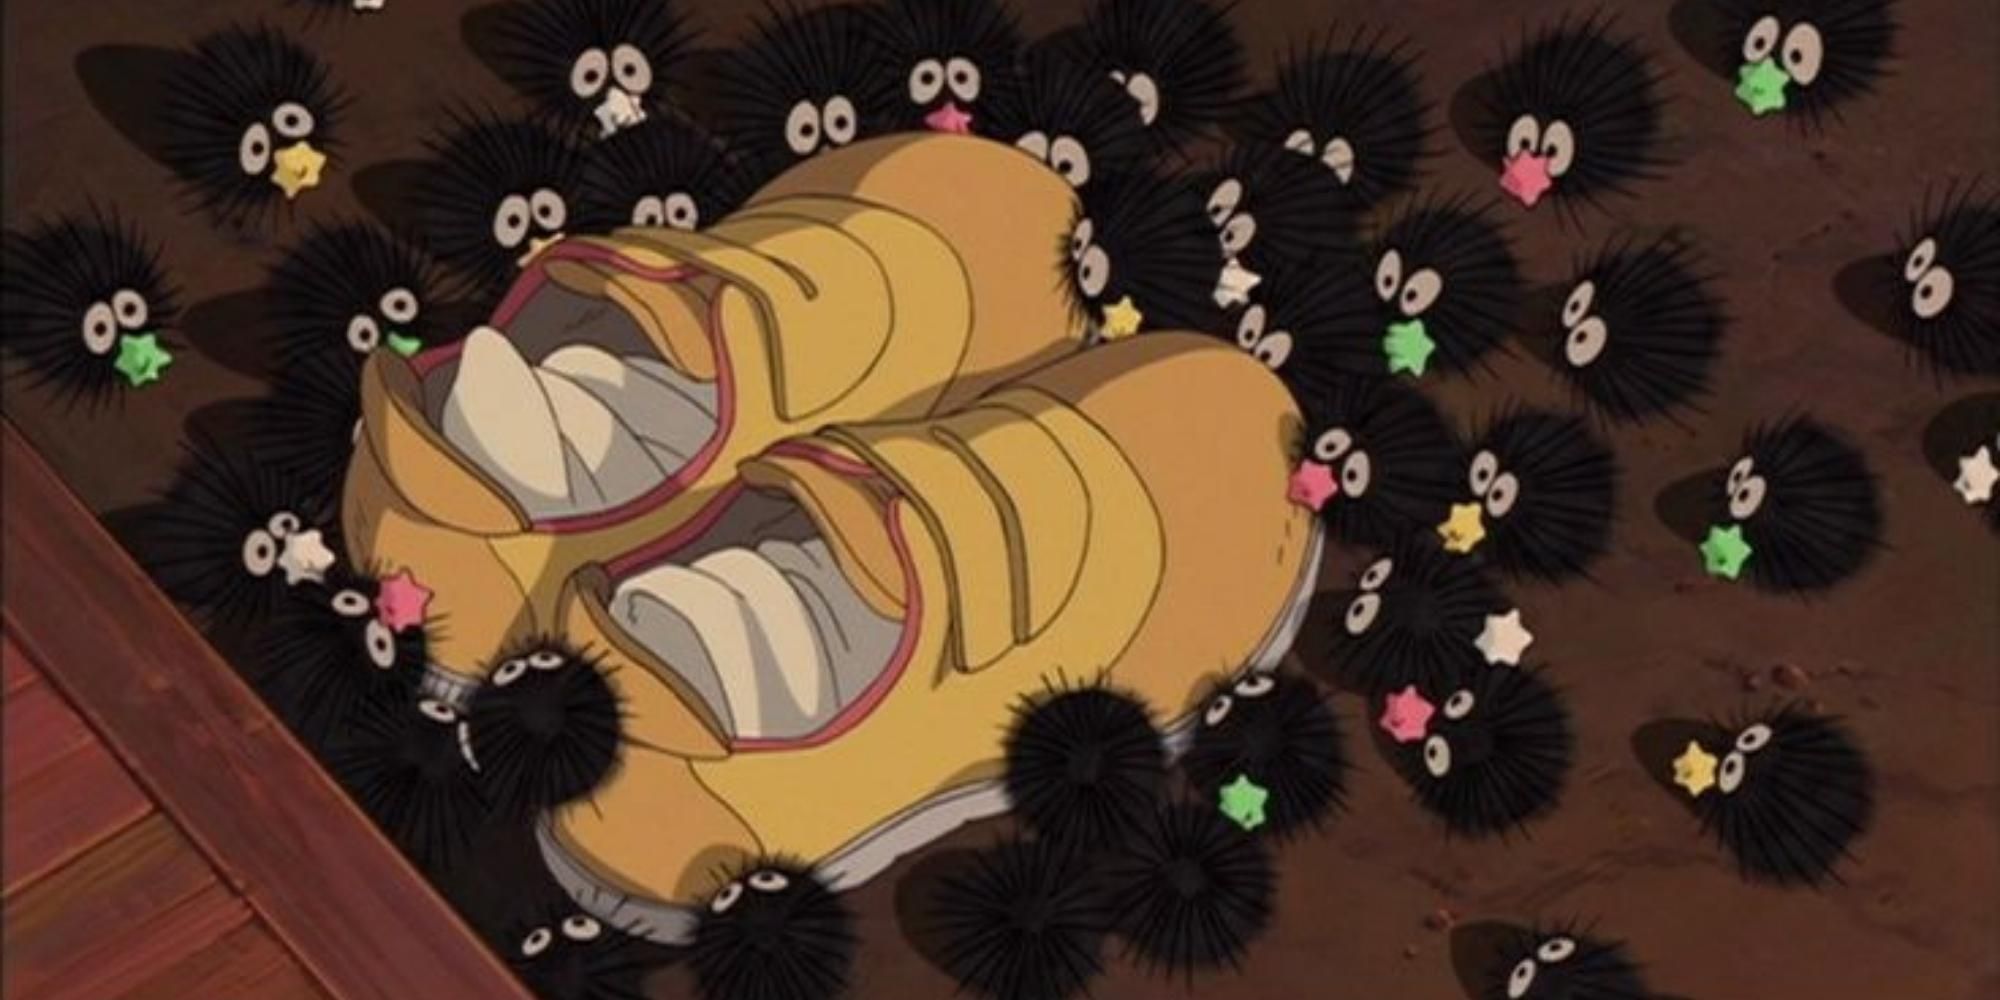 Soot Sprites take Chihiro’s Shoes in Spirited Away